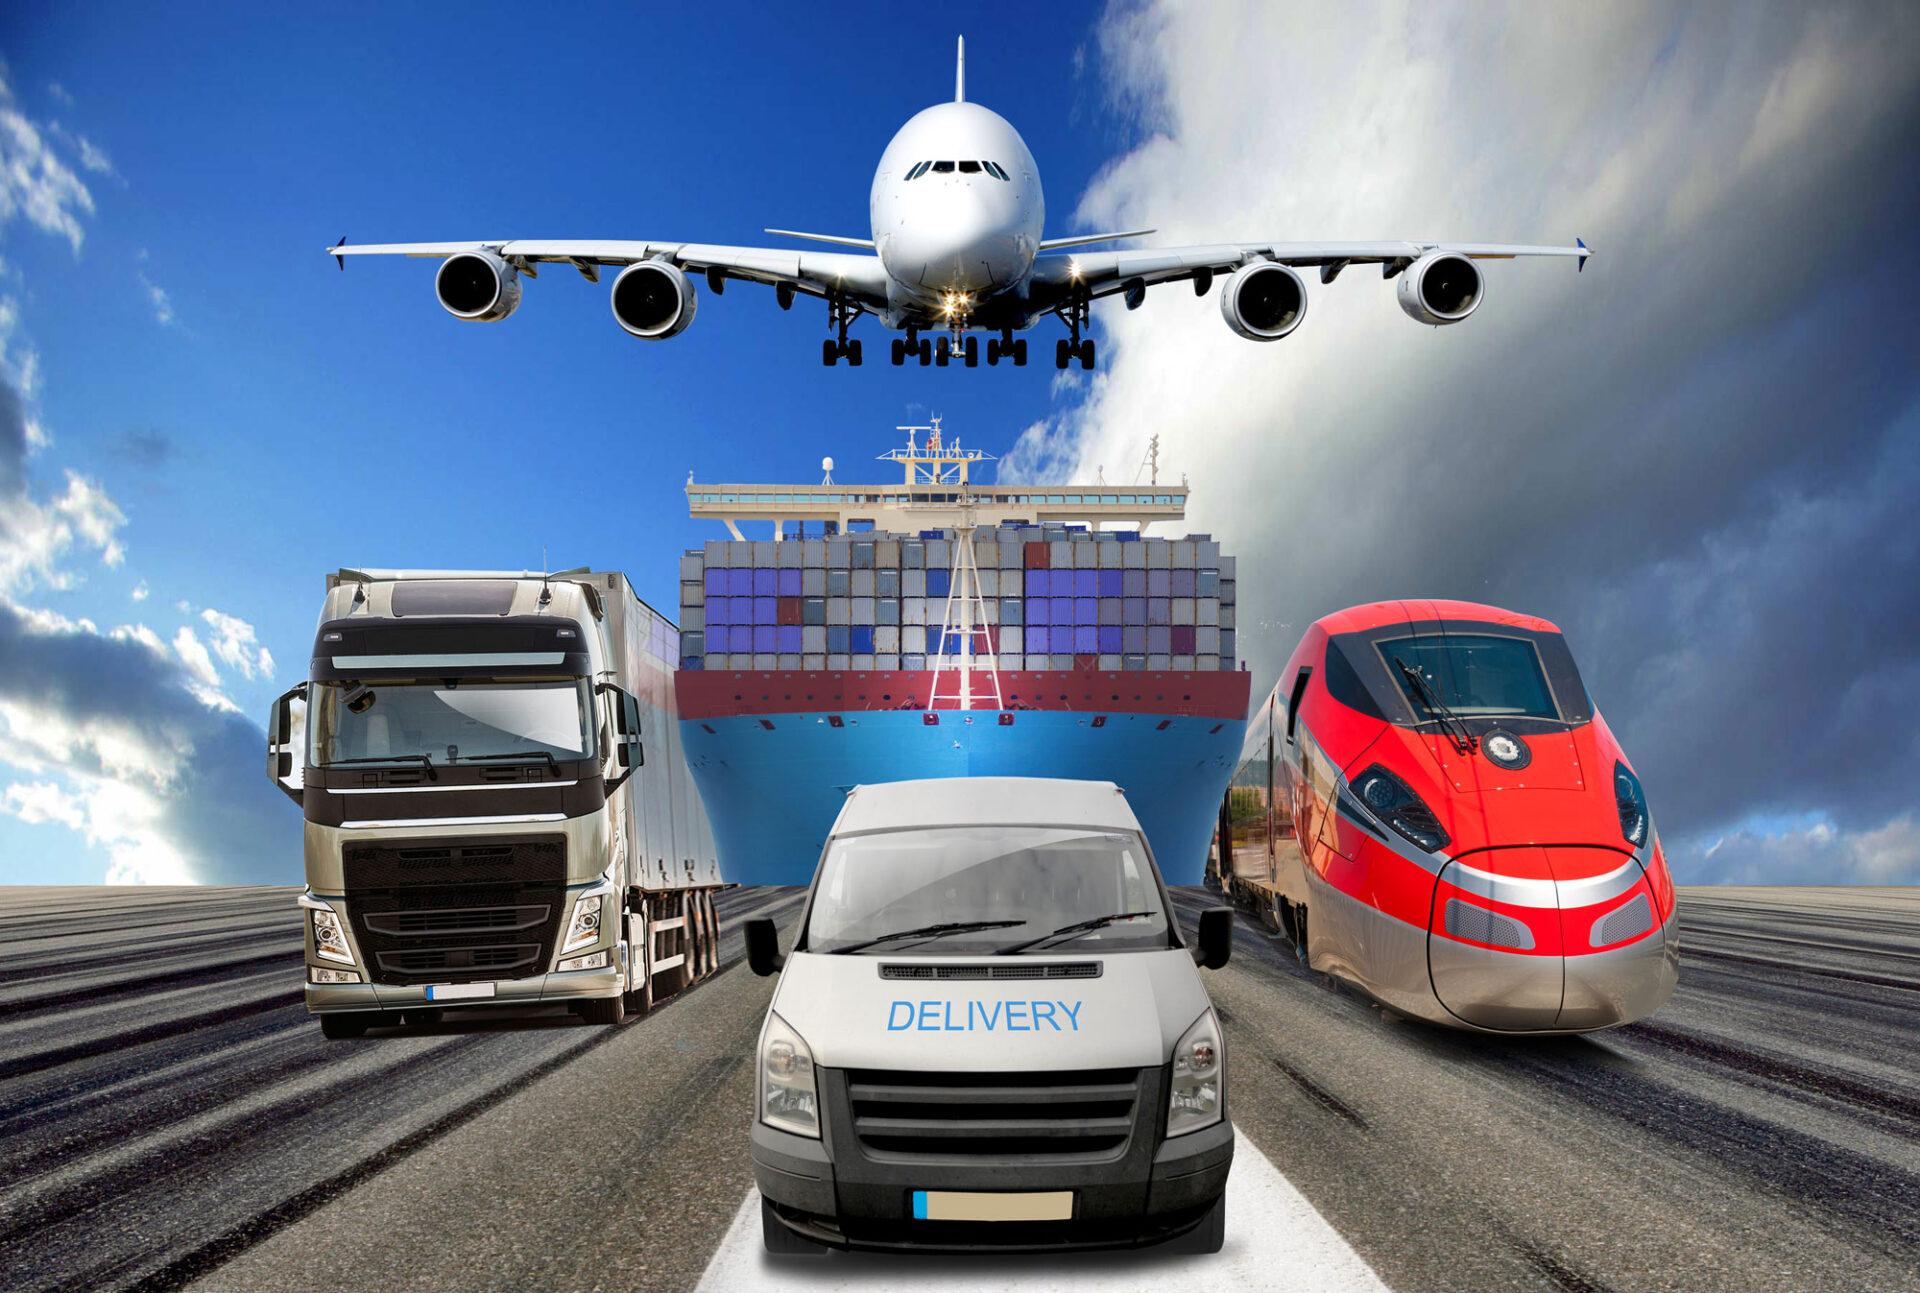 Illustration, showing a truck, car, shipping, train and airplane